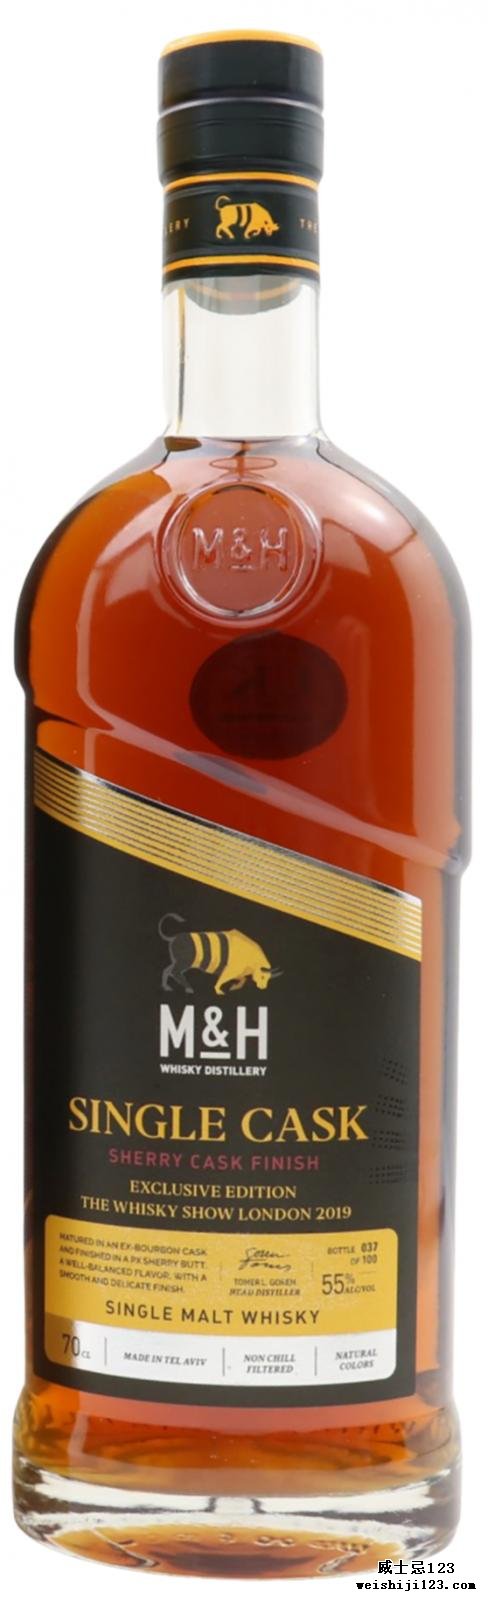 M&H The Whisky Show London 2019